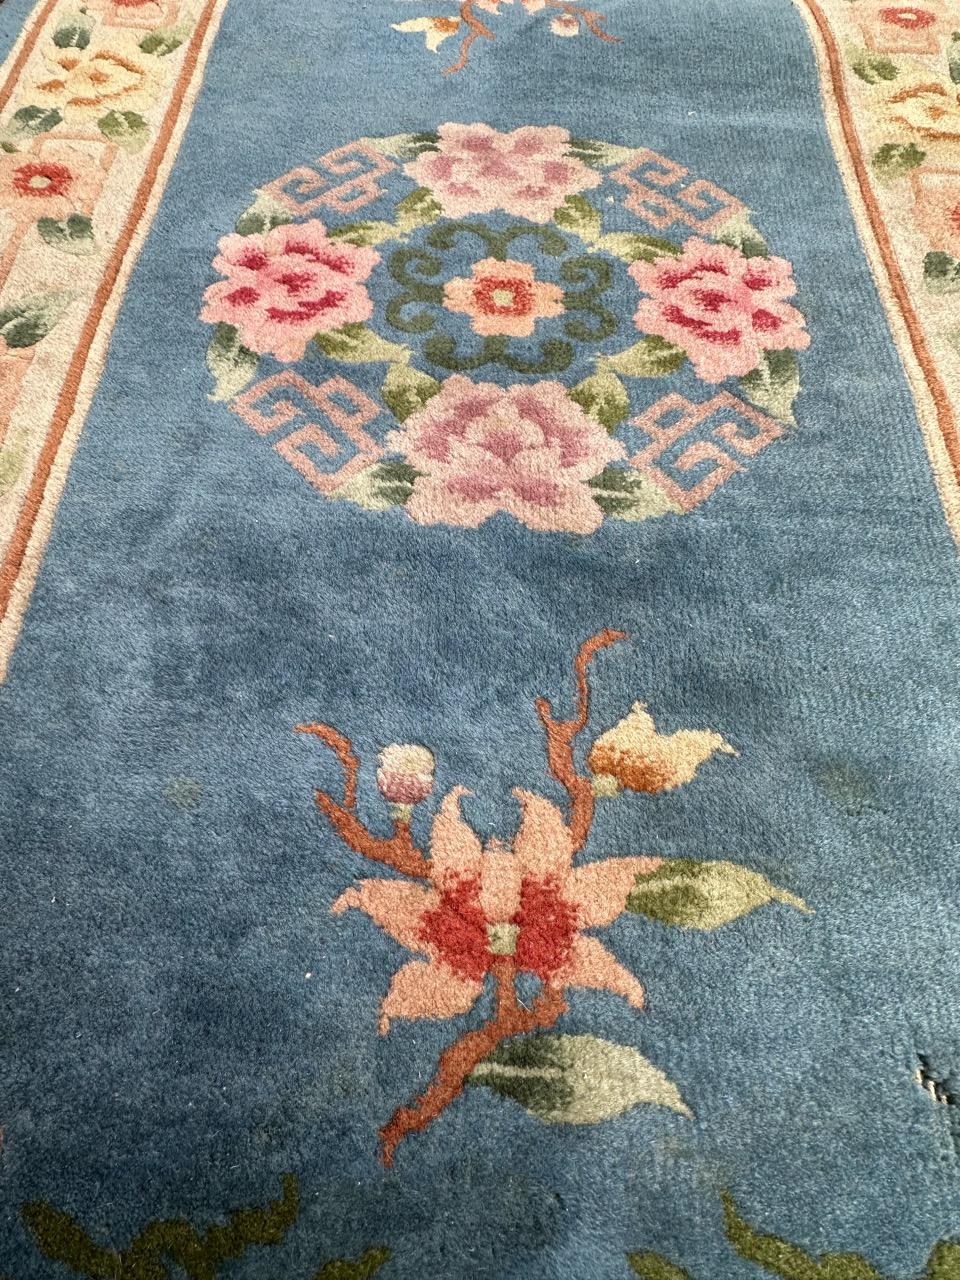 Pretty 20th century Chinese rug with beautiful Chinese floral design and nice colours with a sky blue field and pink, orange, brown, purple, green and white in design and borders. Entirely hand knotted with wool on cotton foundation. Little wear of